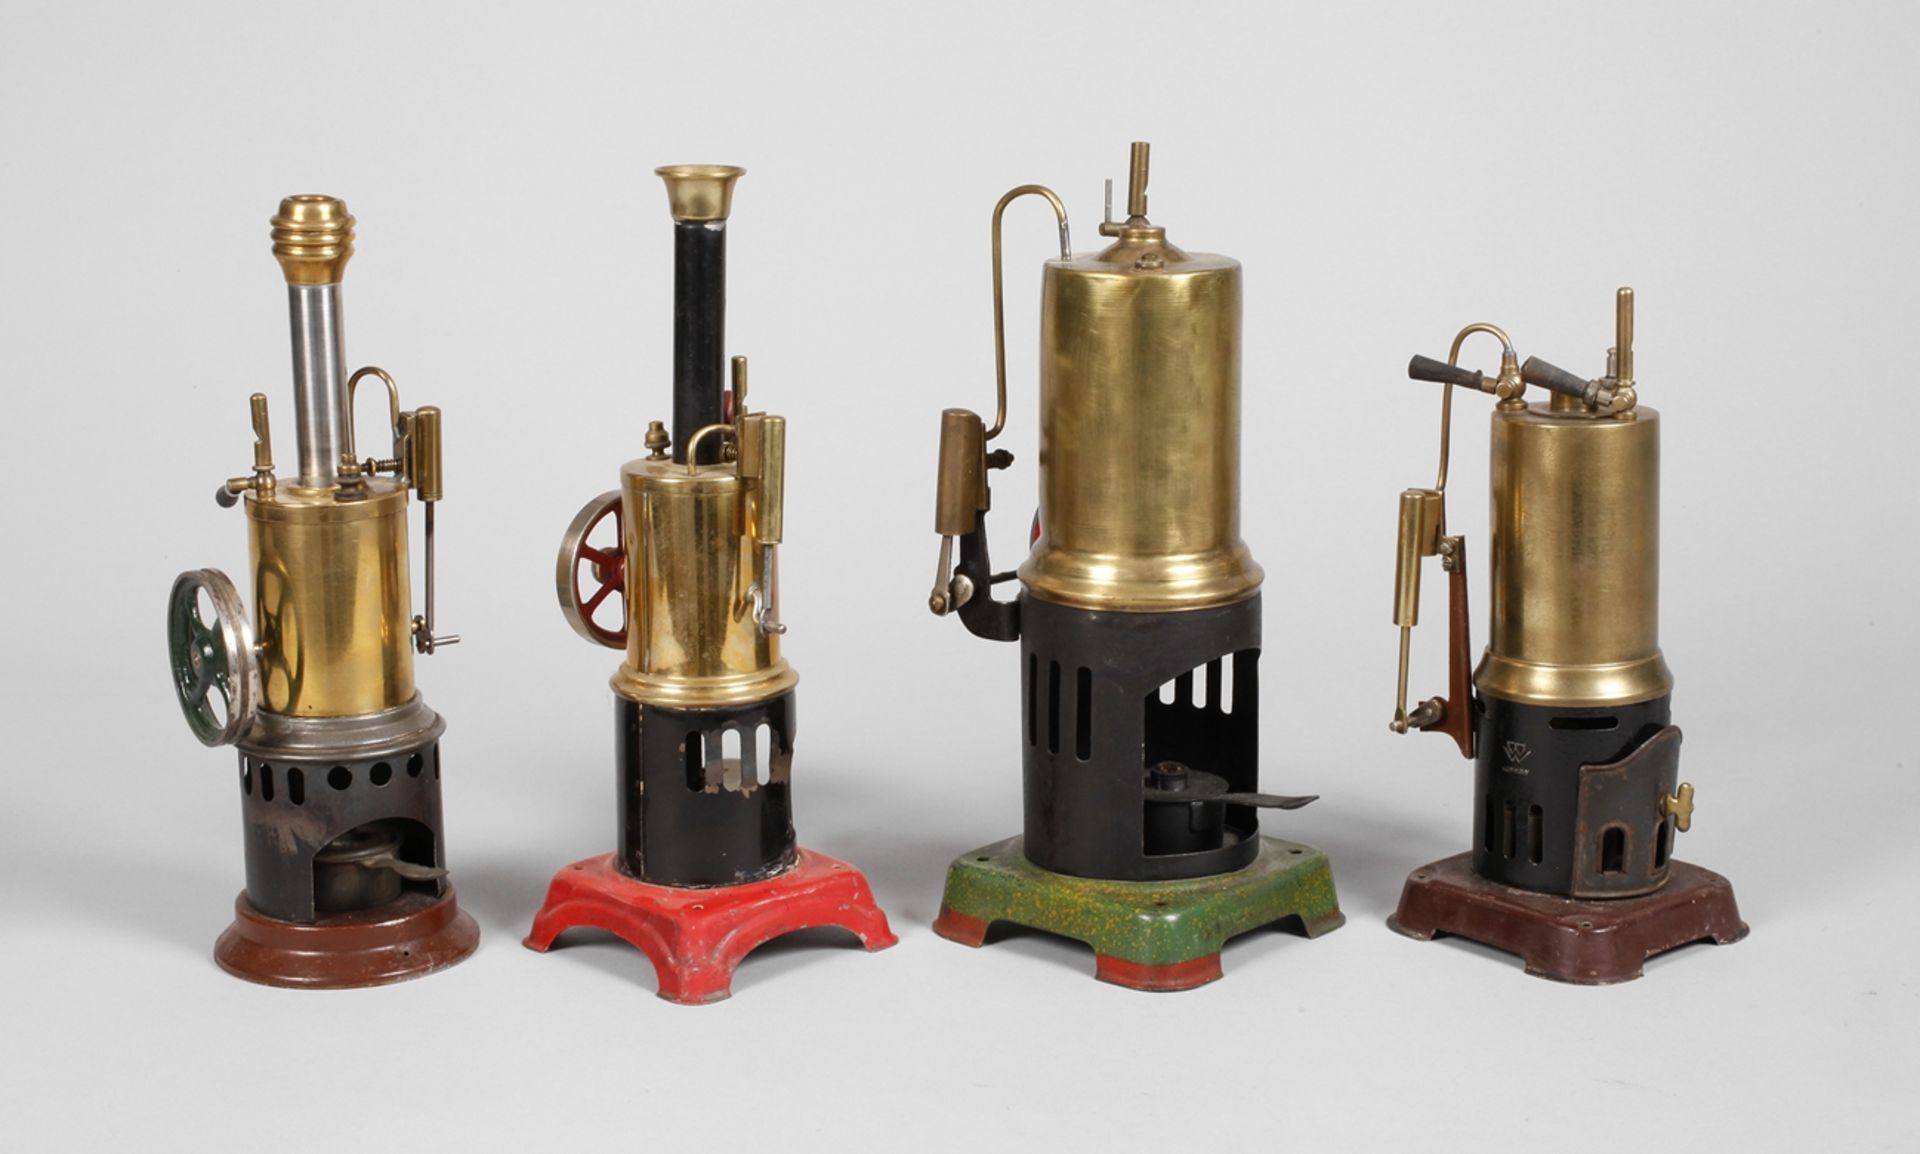 Four small standing steam engines